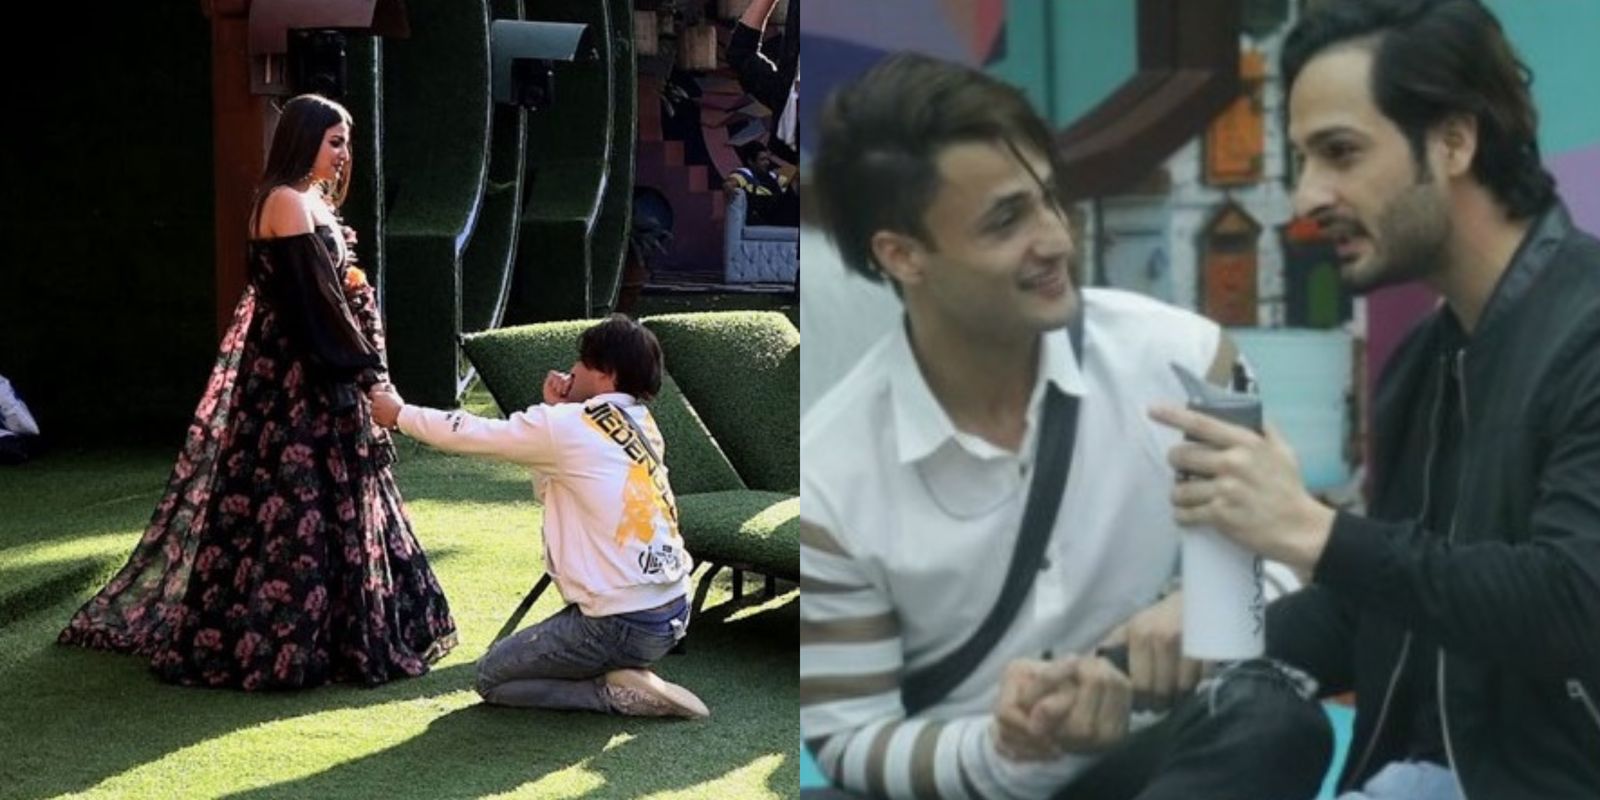 Bigg Boss 13: Umar Riaz Reveals His True Feelings About Brother Asim’s Marriage Proposal To Himanshi Khurana